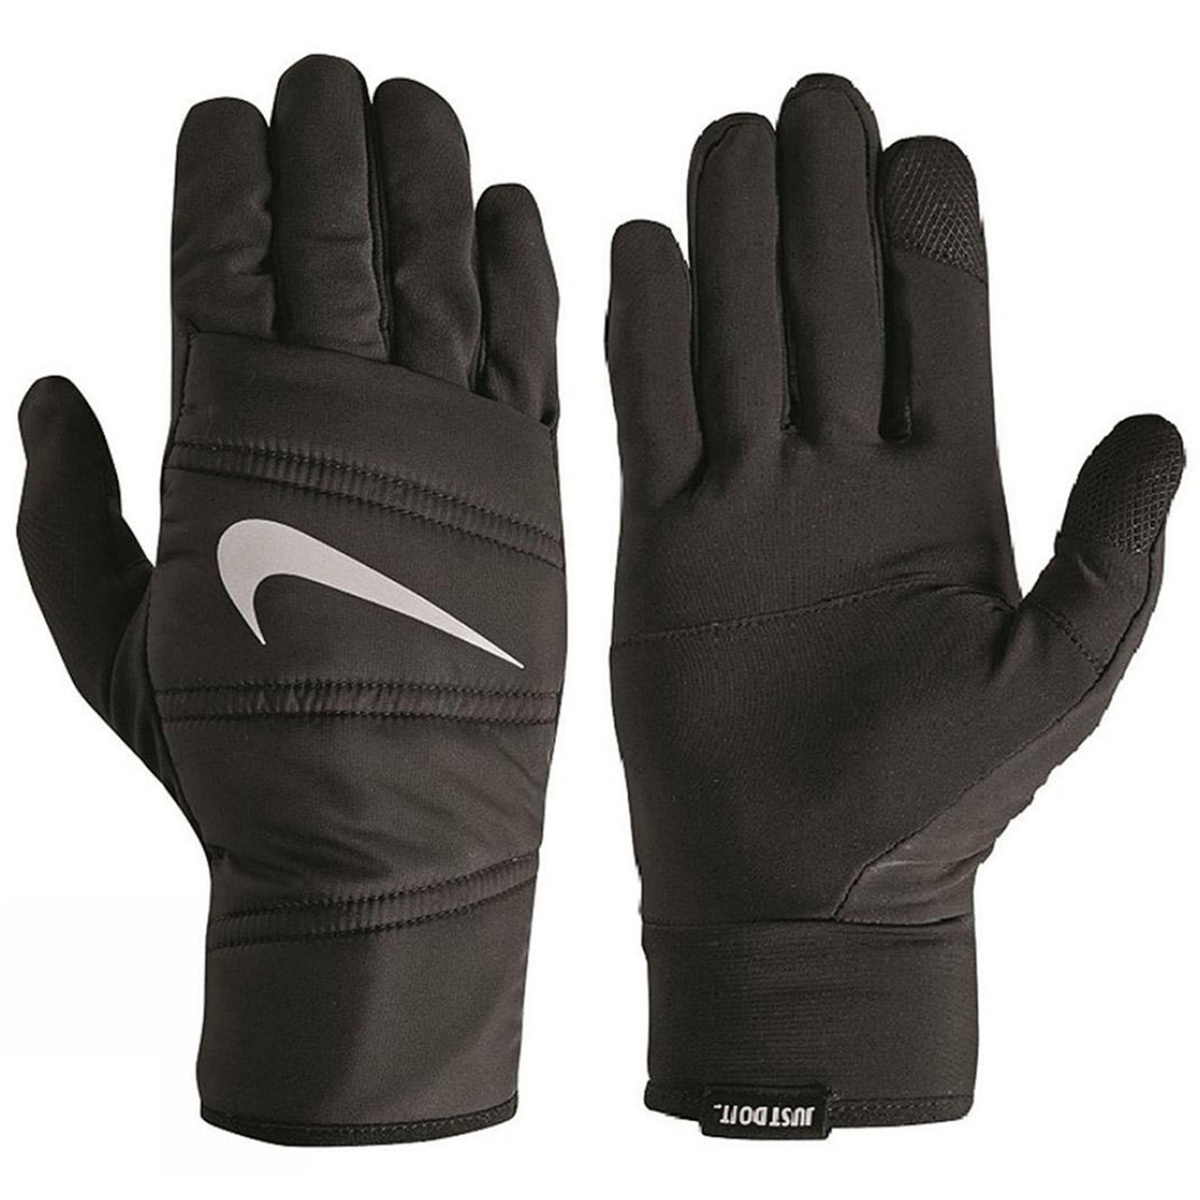 Nike MEN'S NIKE QUILTED RUN GLOVES XL BLACK/S 